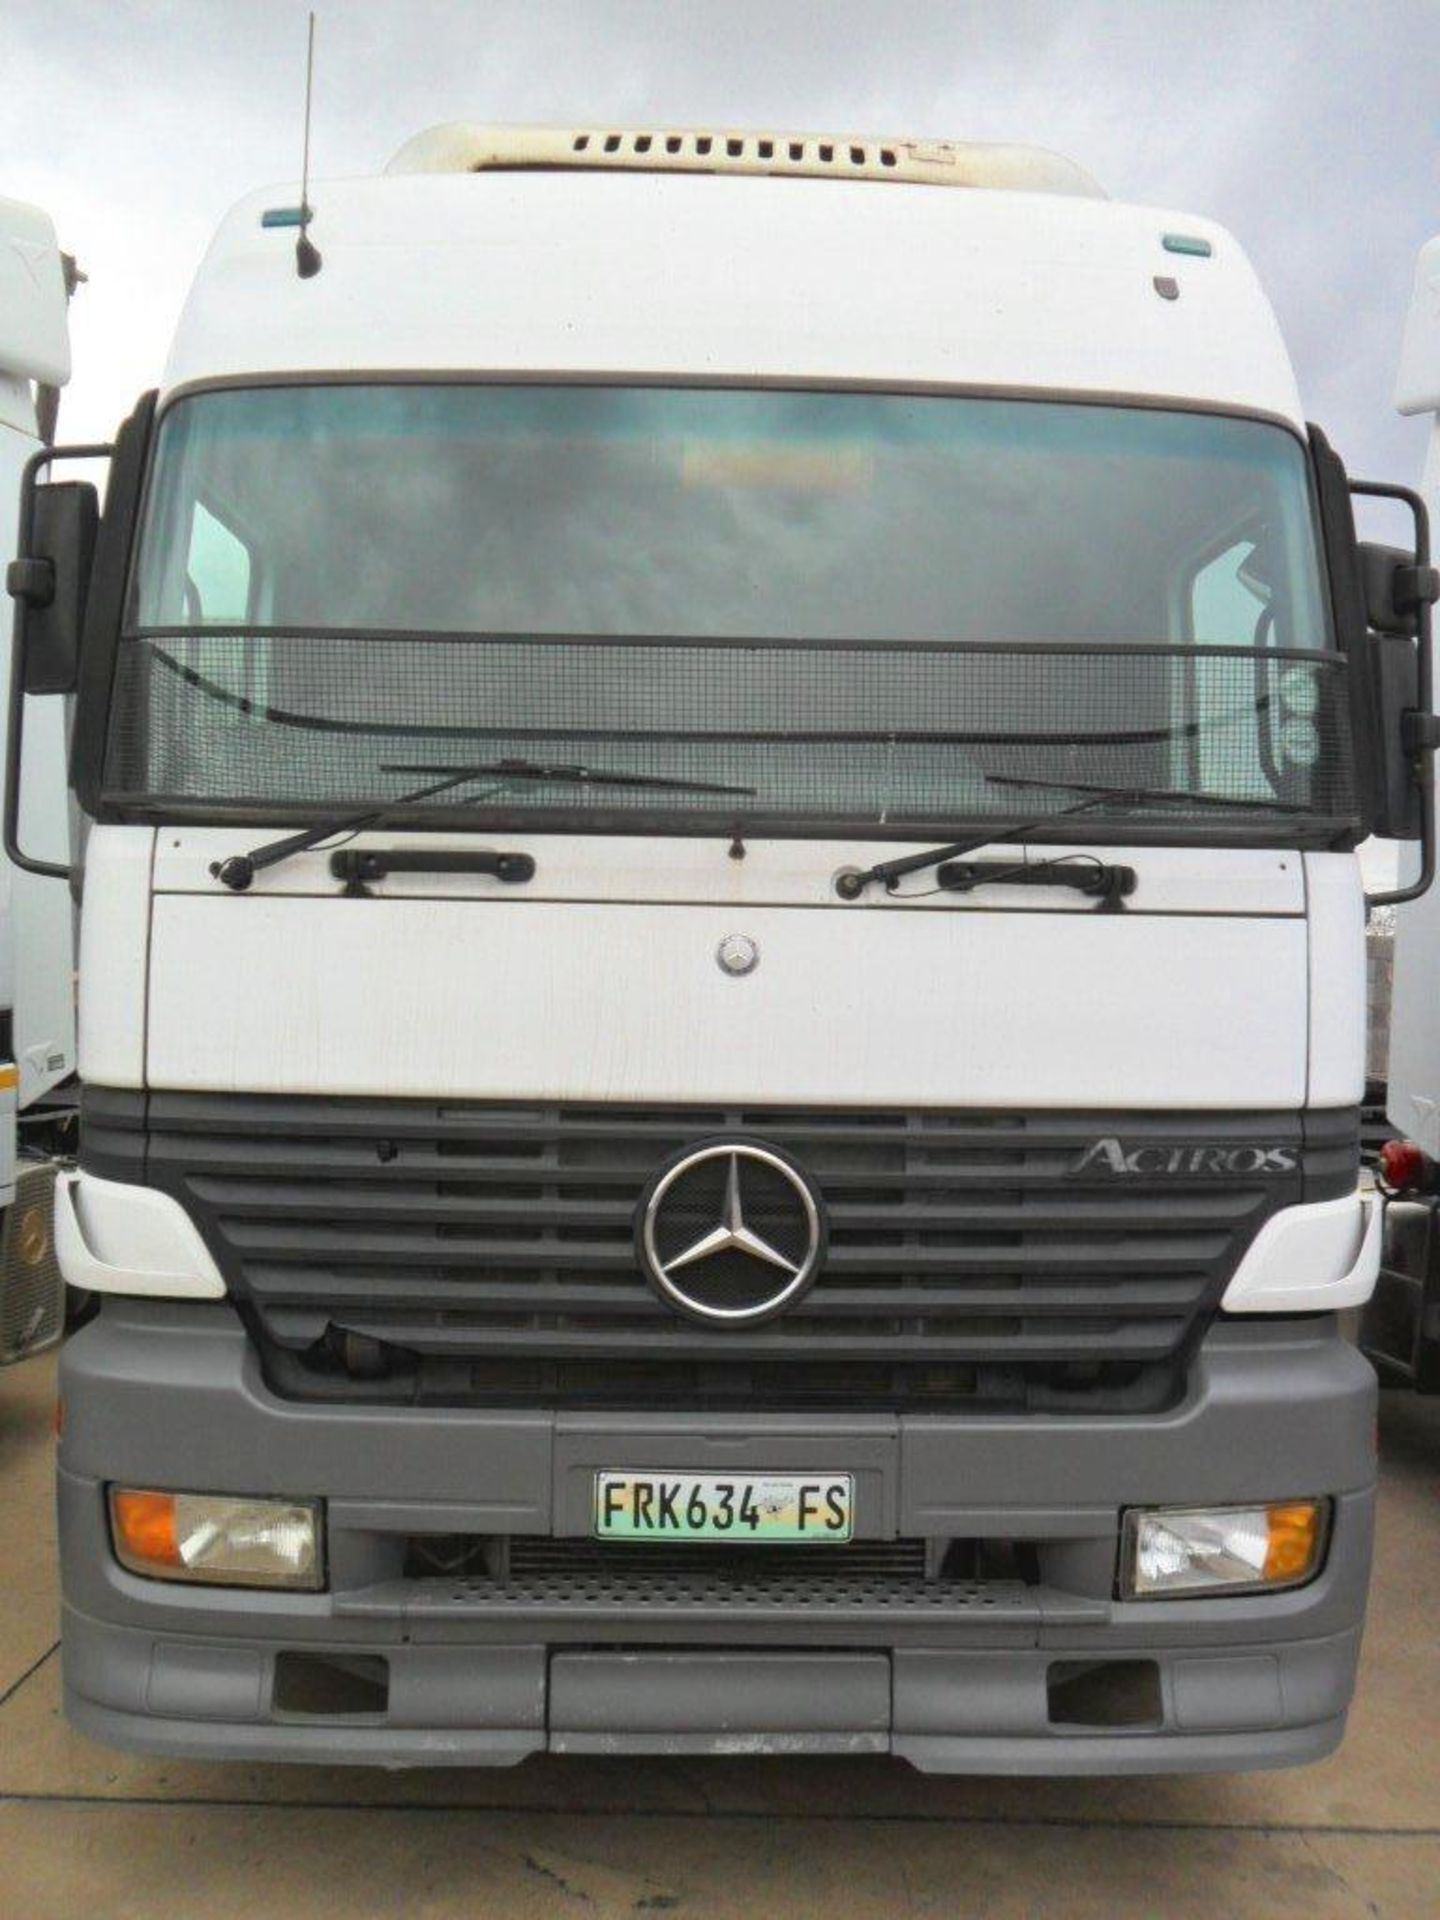 2003 M/BENZ ACTROS 2648 6X4 T/T - REG NO: FRK634FS - (ITEM TO BE SOLD SUBJECT TO CONFIRMATION) - Image 9 of 10